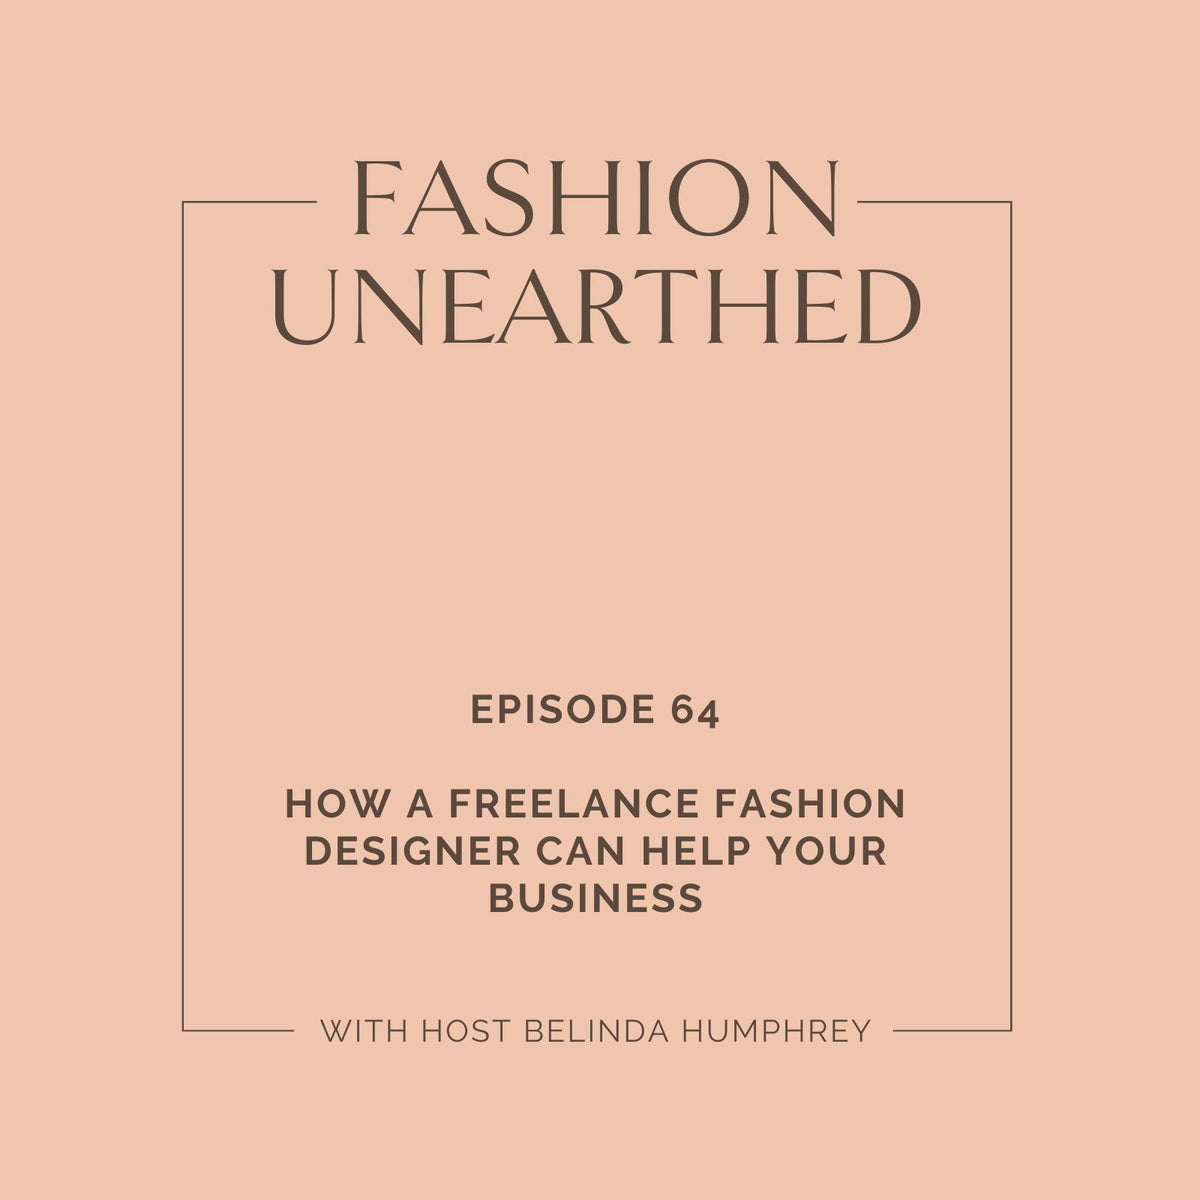 Episode 64: How a freelance fashion designer can help your business